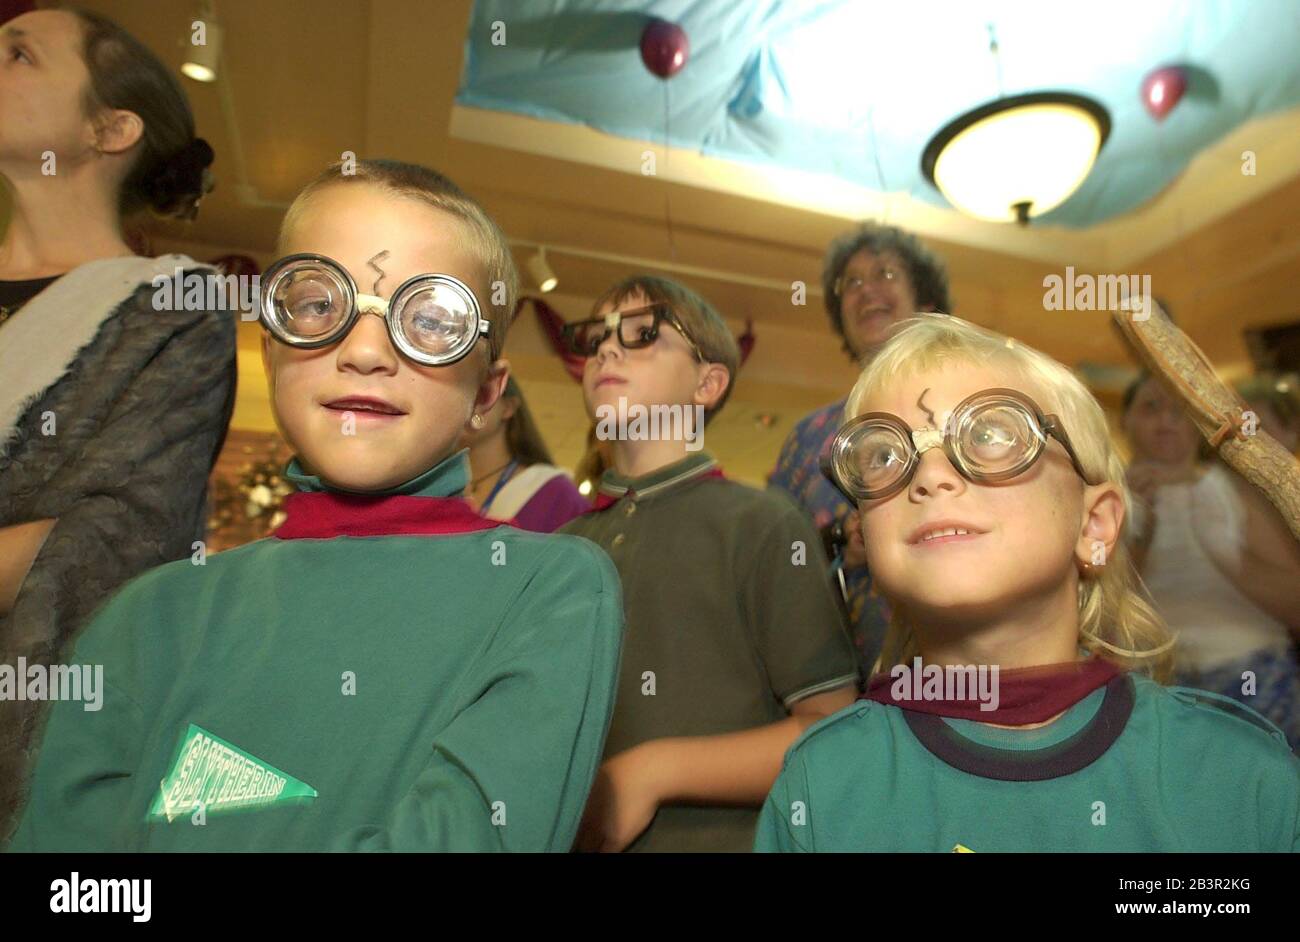 Austin, Texas USA, 08JUL00: Pint-sized Harry Potters and others in costume join in a costume contest Saturday at Book People independent bookstore downtown as theme parties continued celebrating the release of the fourth 'Harry Potter' book nationwide. ©Bob Daemmrich Stock Photo